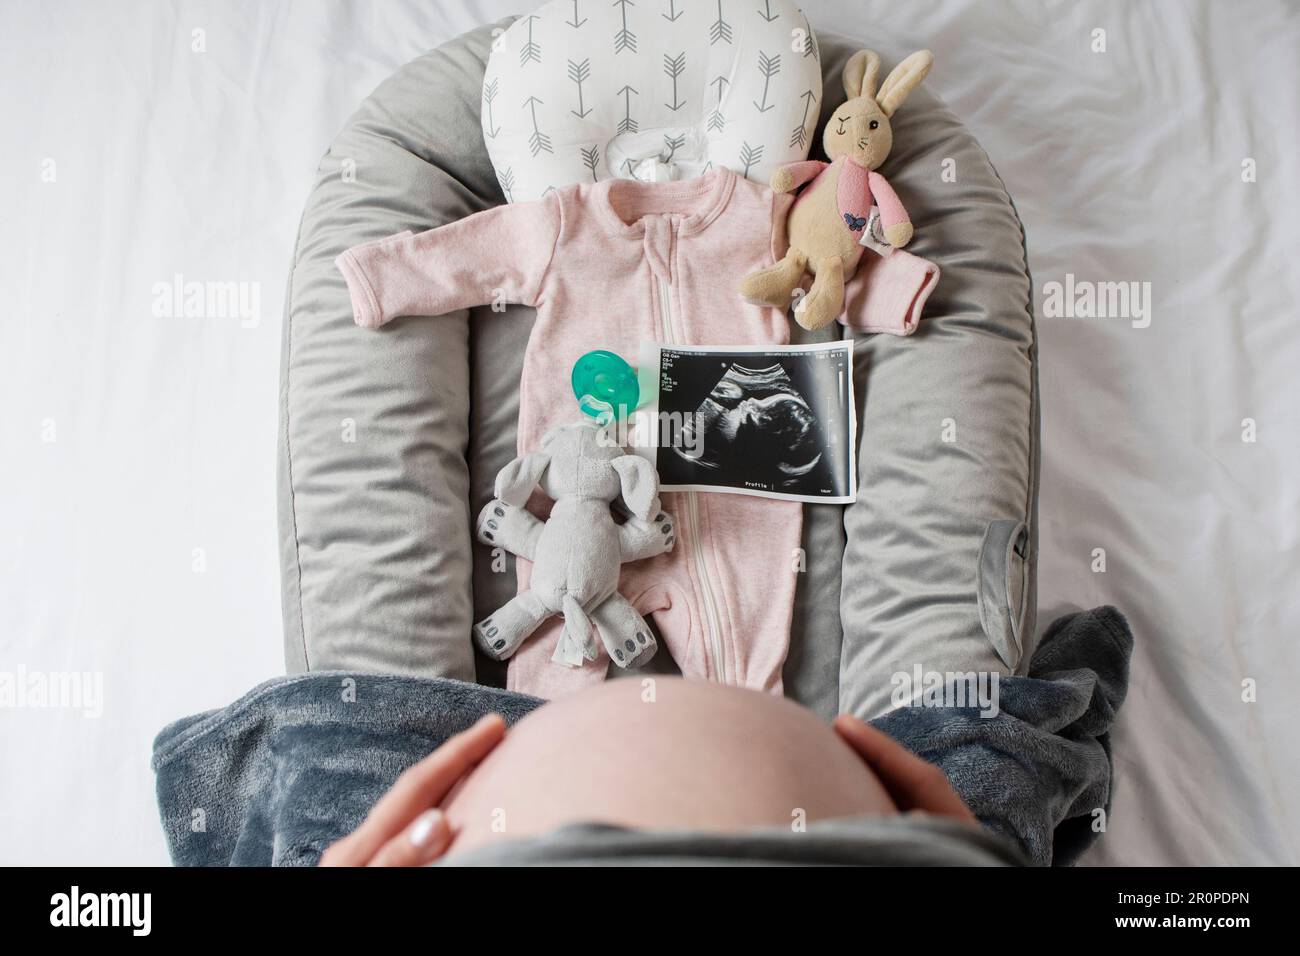 Pregnant belly and stuff for a baby. Waiting for the baby concept. Ready for a baby. Ultrasound picture of a baby. Stock Photo